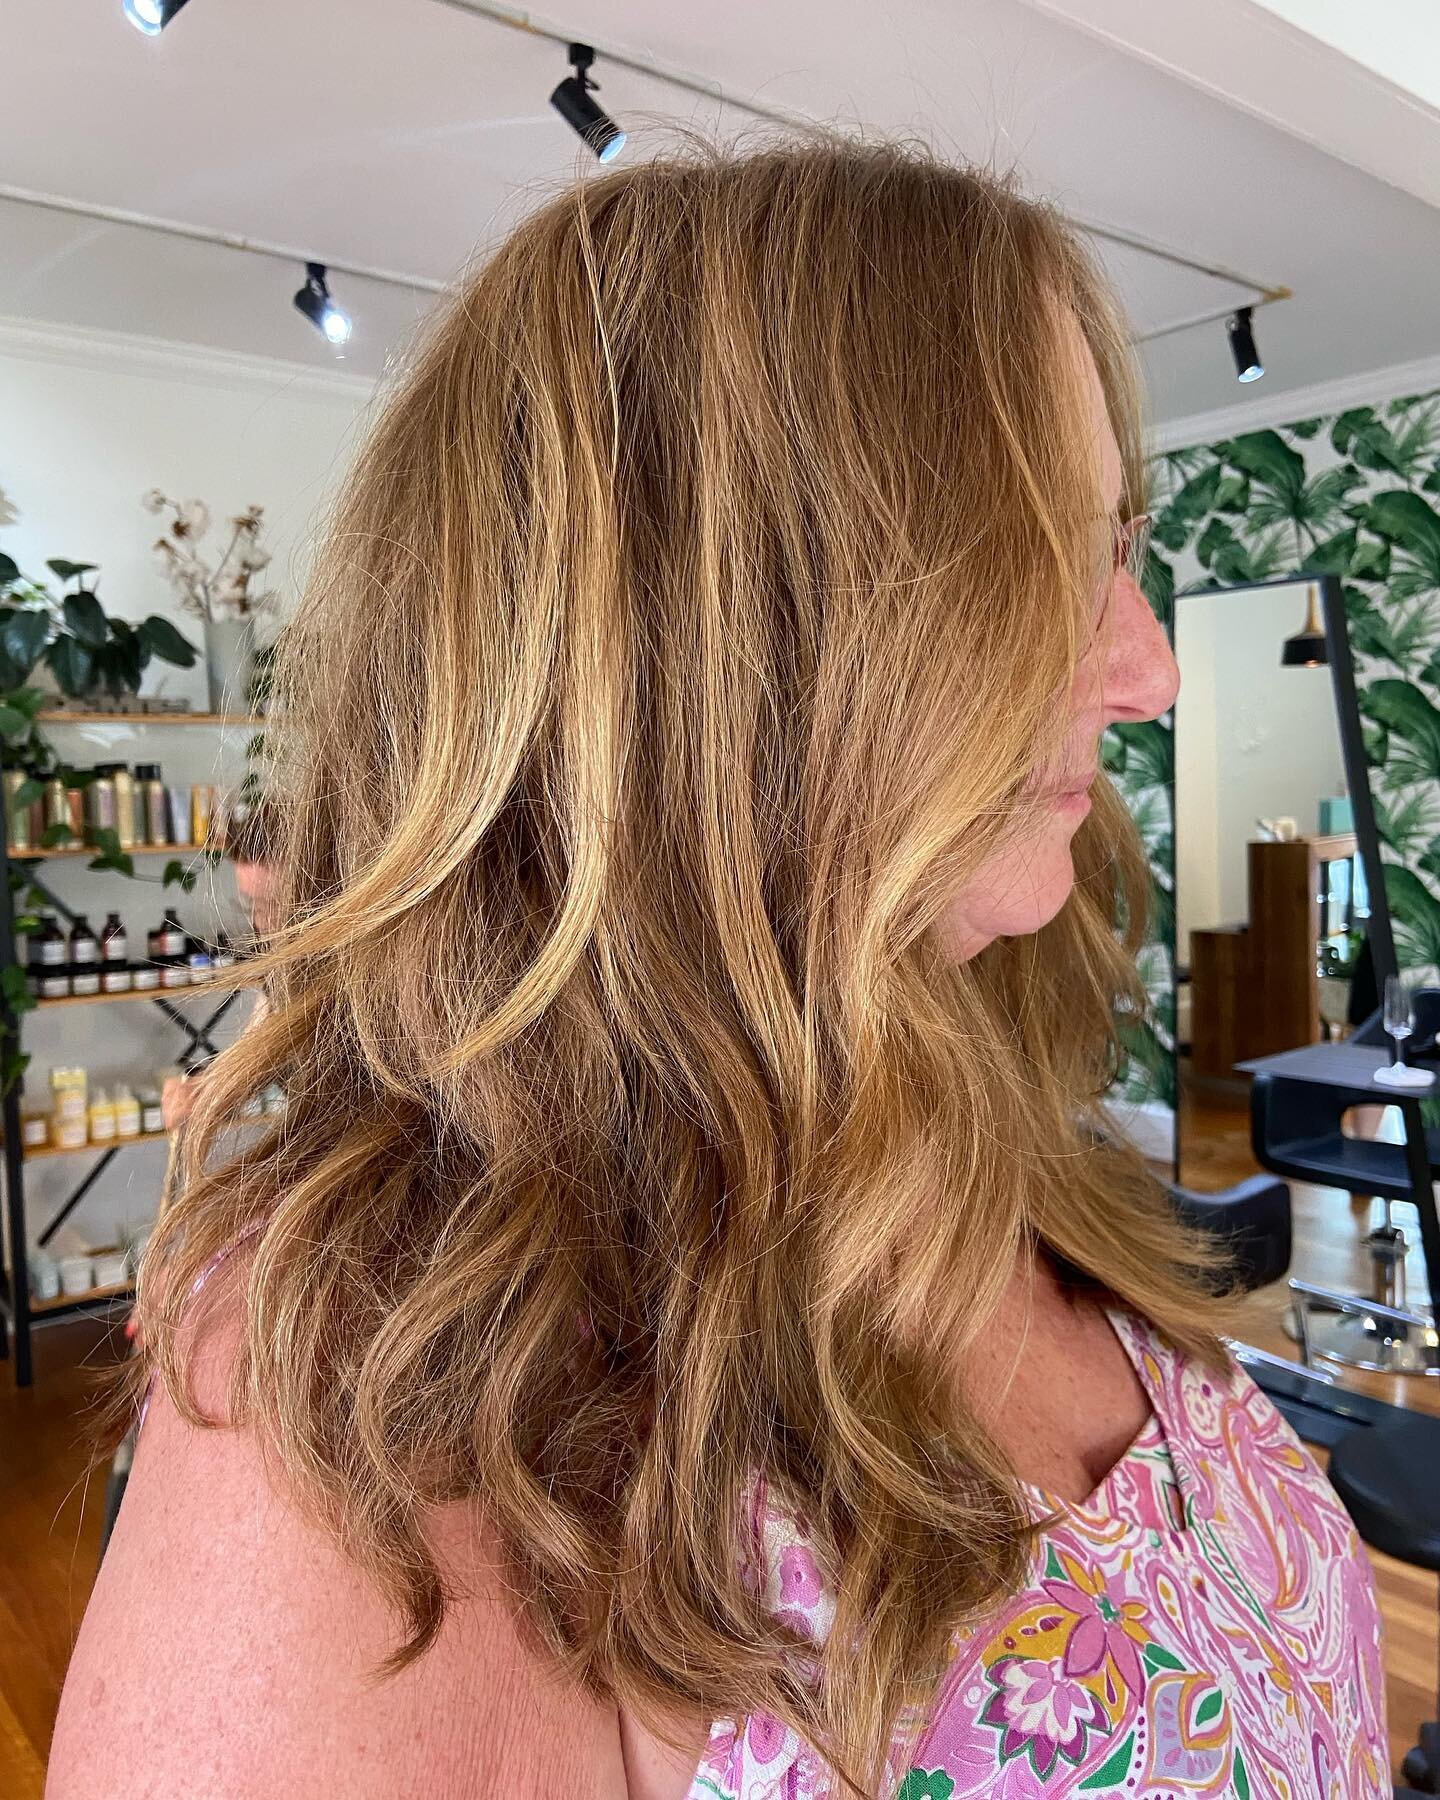 Natural Strawberry hair with that just out of bed finish 🔥 

Cut &amp; finish by @nicinskip

#sustainablesalon #sustainablehairdresser #livedinblonde #balayage #blonde #blondehighlights #newhair #sydneyhairdresser #sydneystylist #sydneycolourist #sy